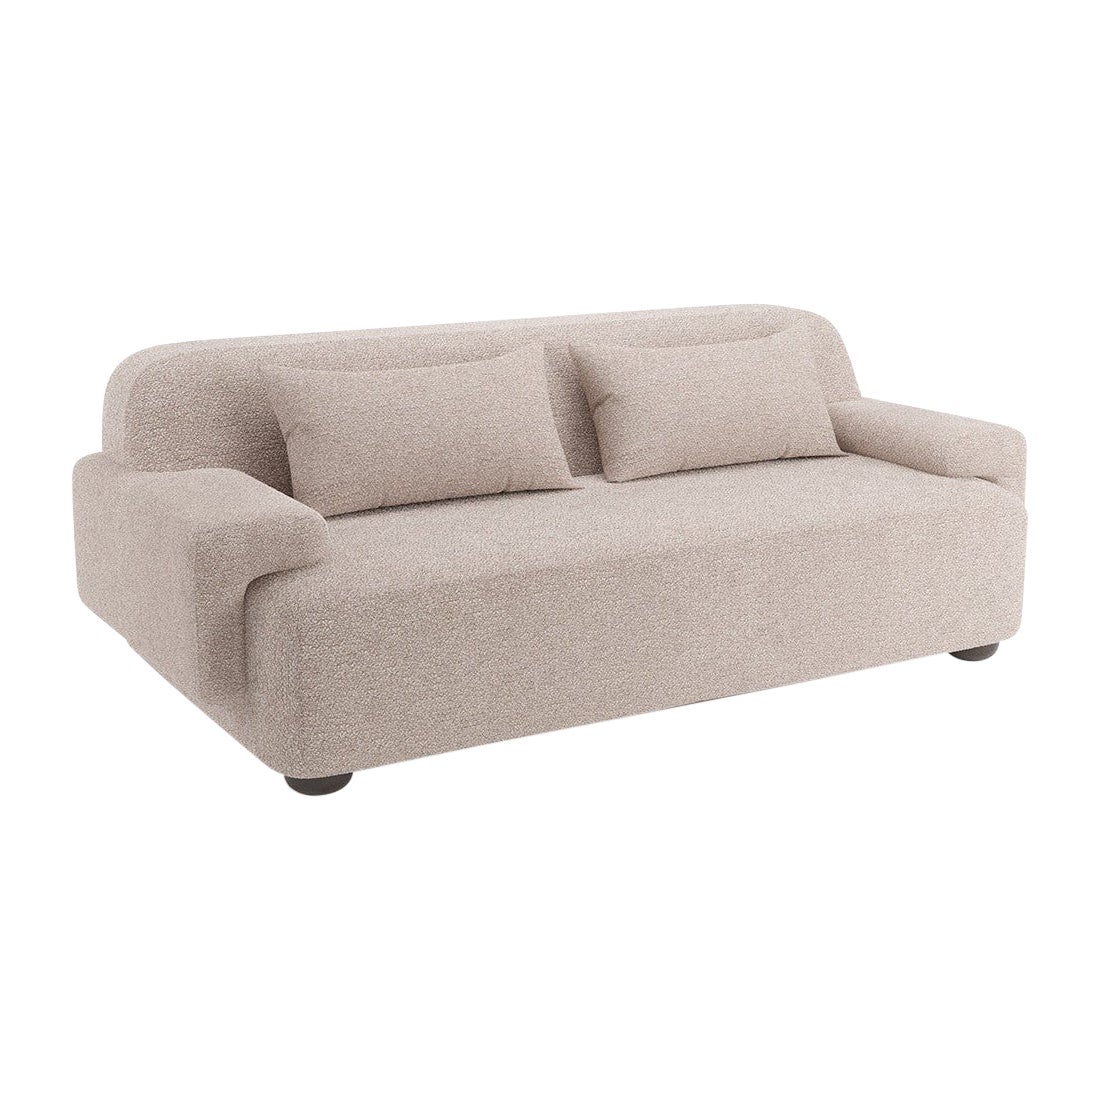 Popus Editions Lena 3 Seater Sofa in Mole Taupe Malmoe Terry Upholstery